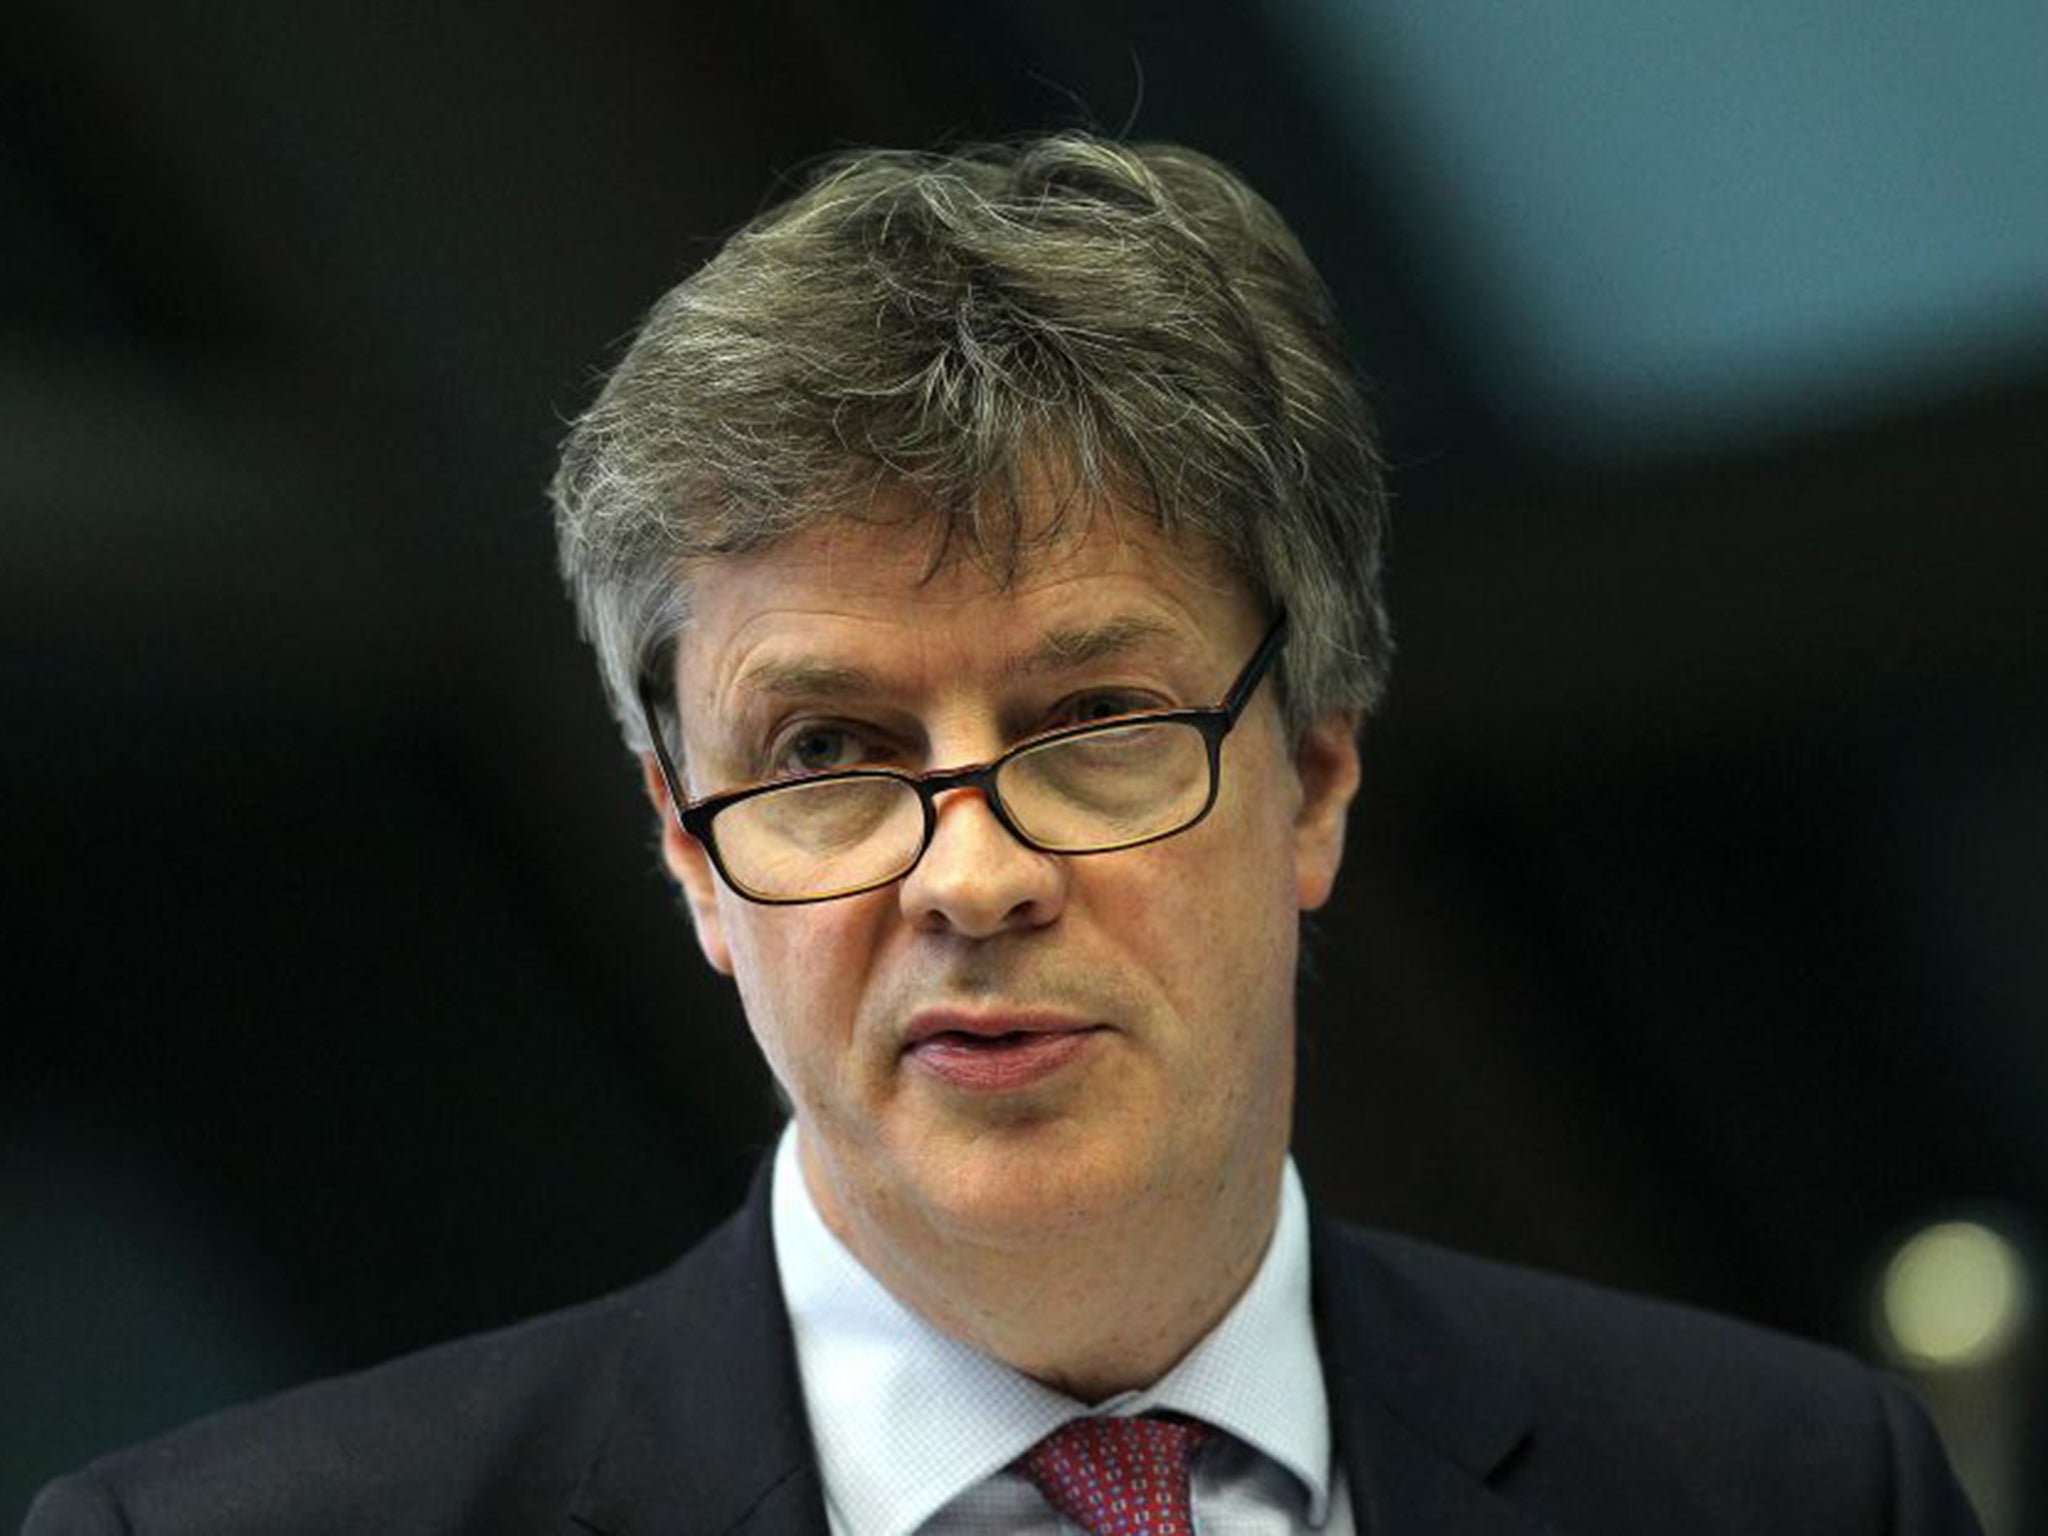 Lord Hill is the EU commissioner for financial services